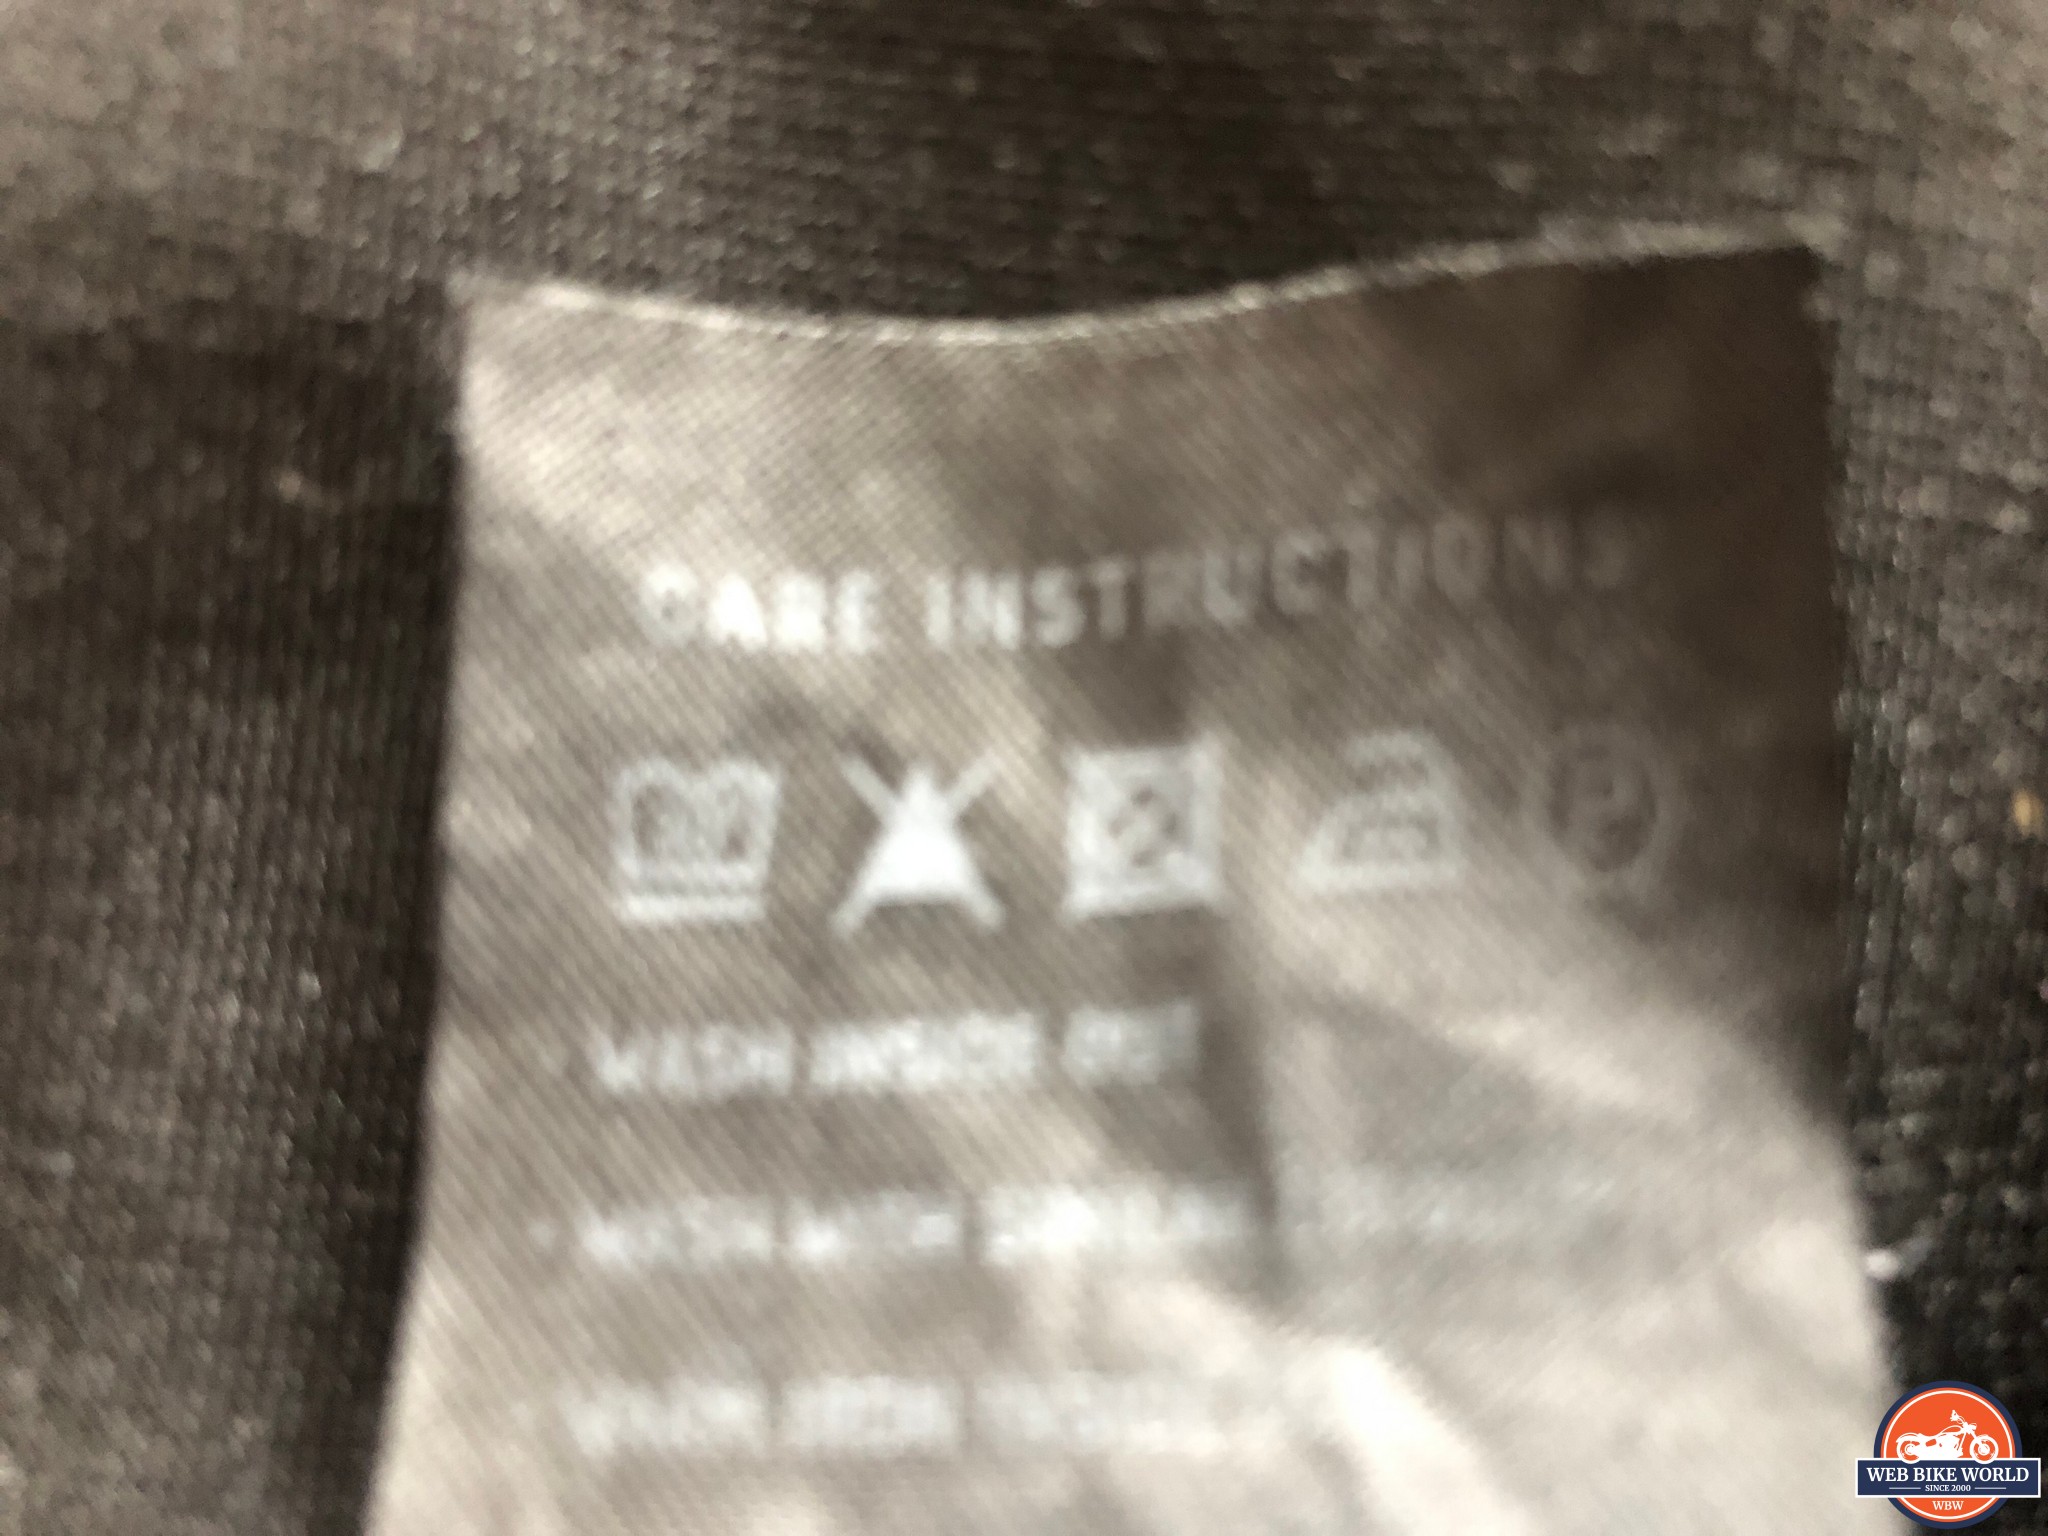 Oxford AA leggings materials and washing instructions